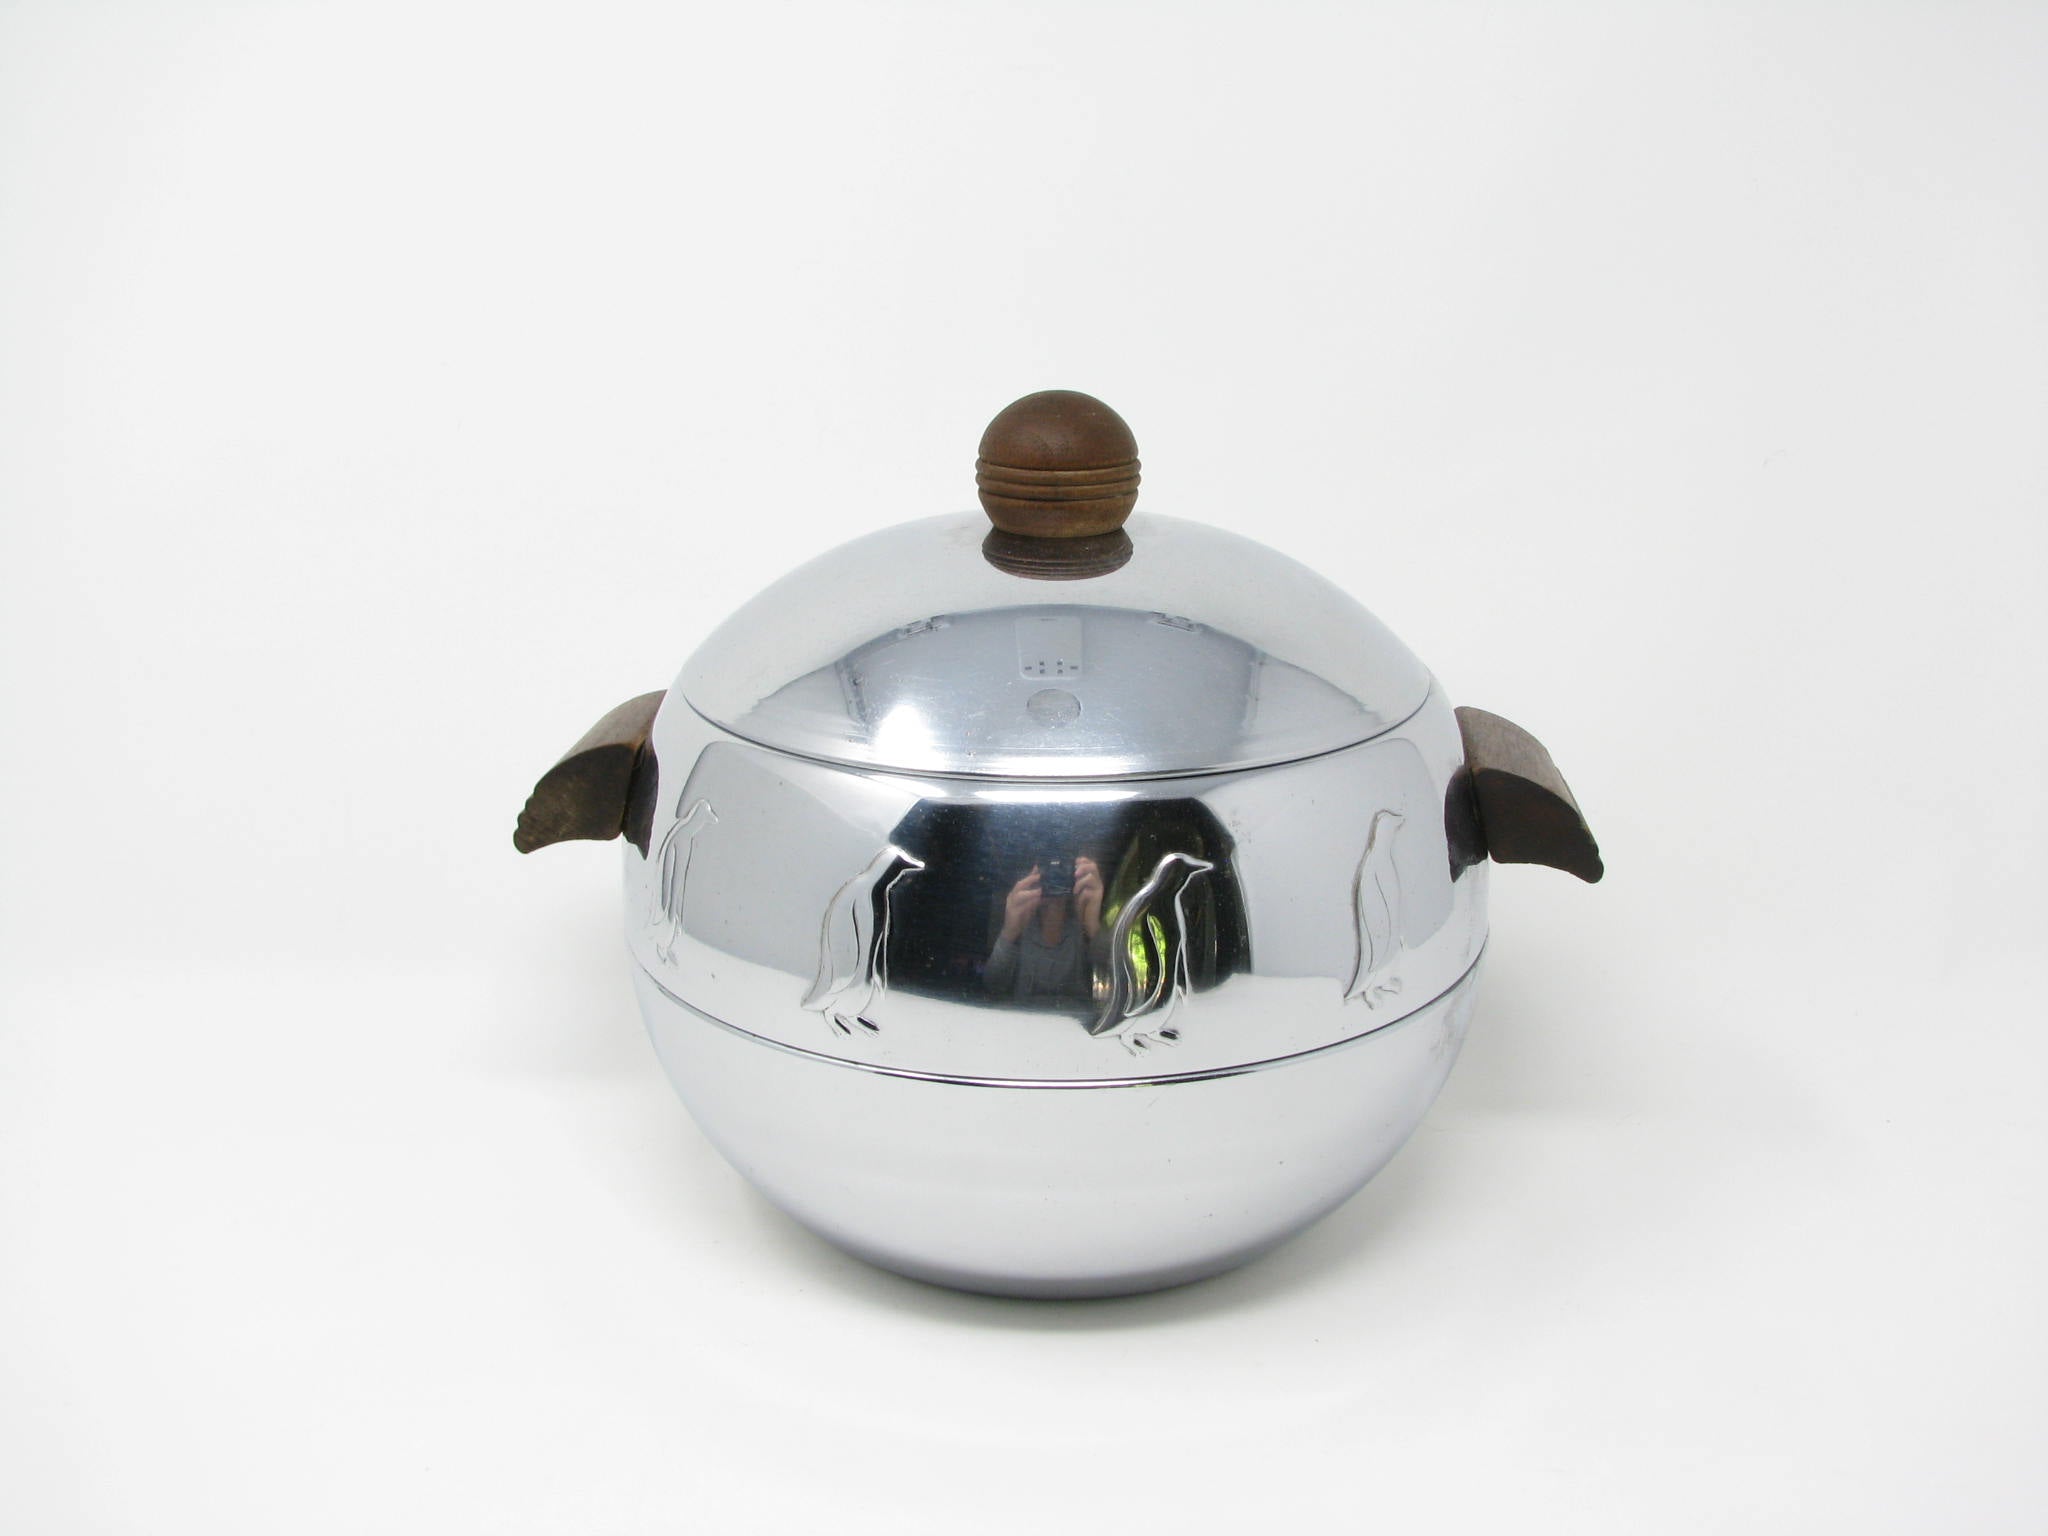 edgebrookhouse - Vintage 1940s West Bend Stainless Steel Penguin Ice Bucket / Hot Server with Wooden Handles and Finial A